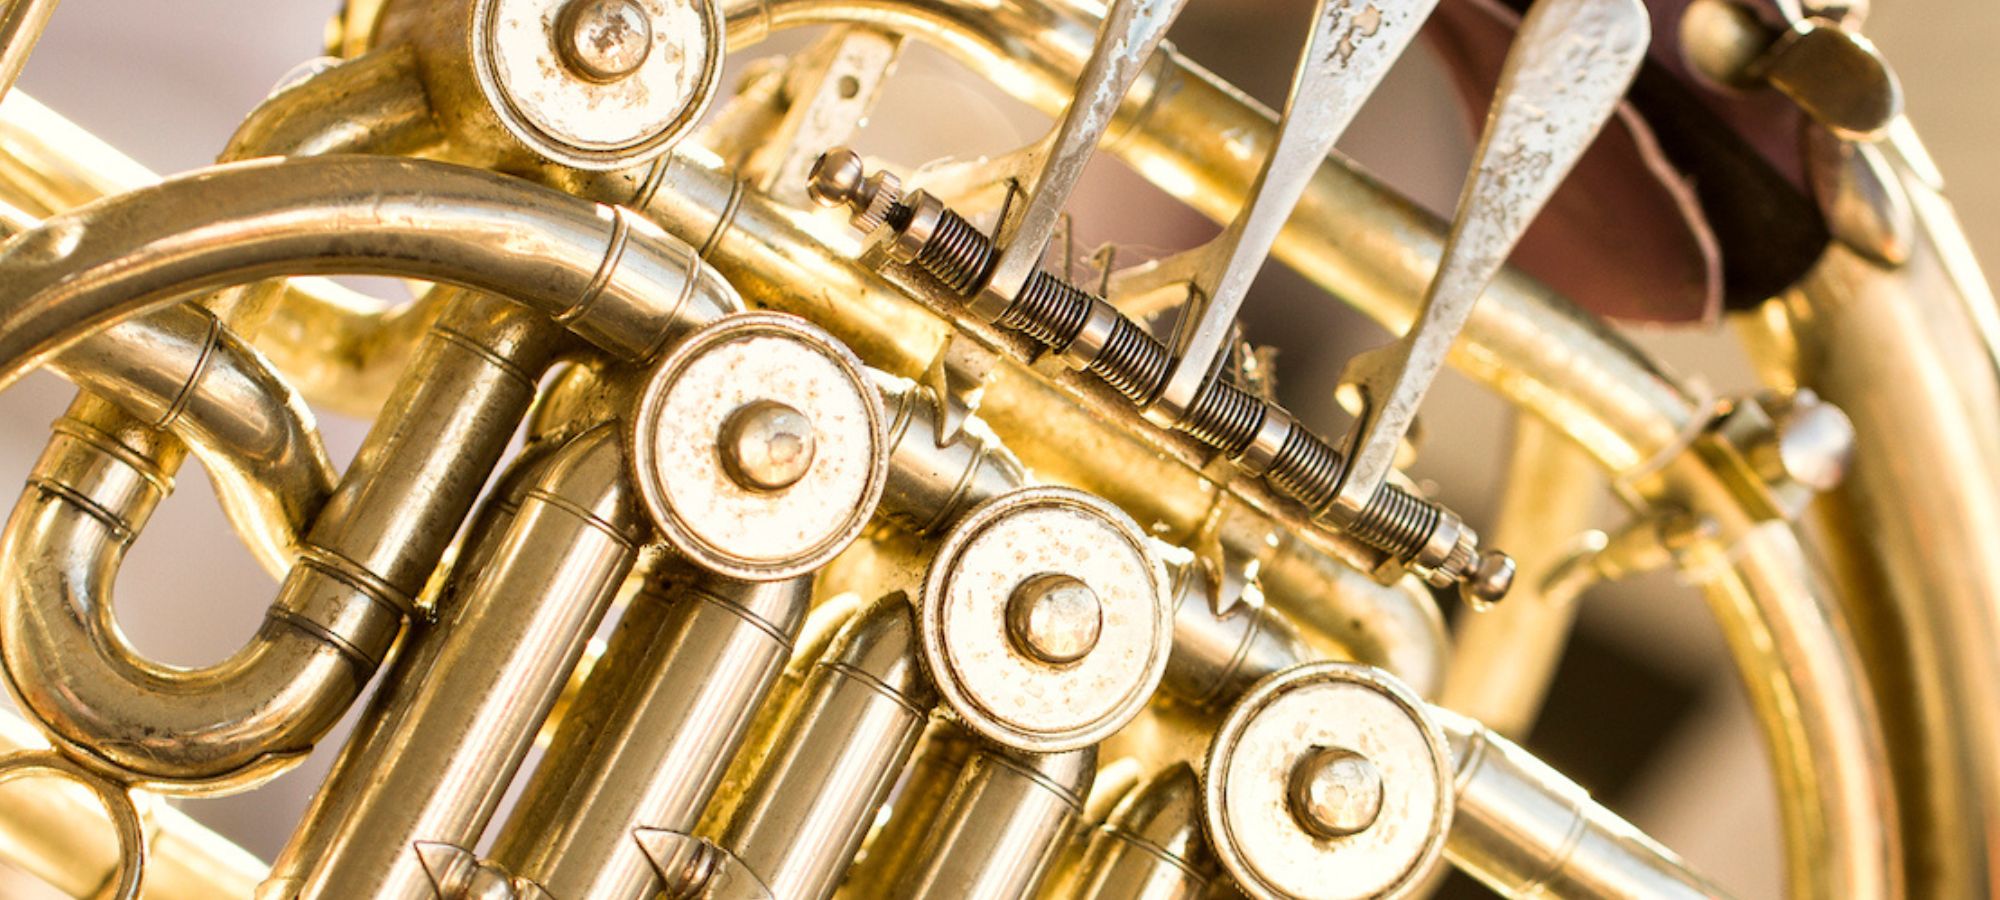 Brass Instruments Belong To What Instrument Category